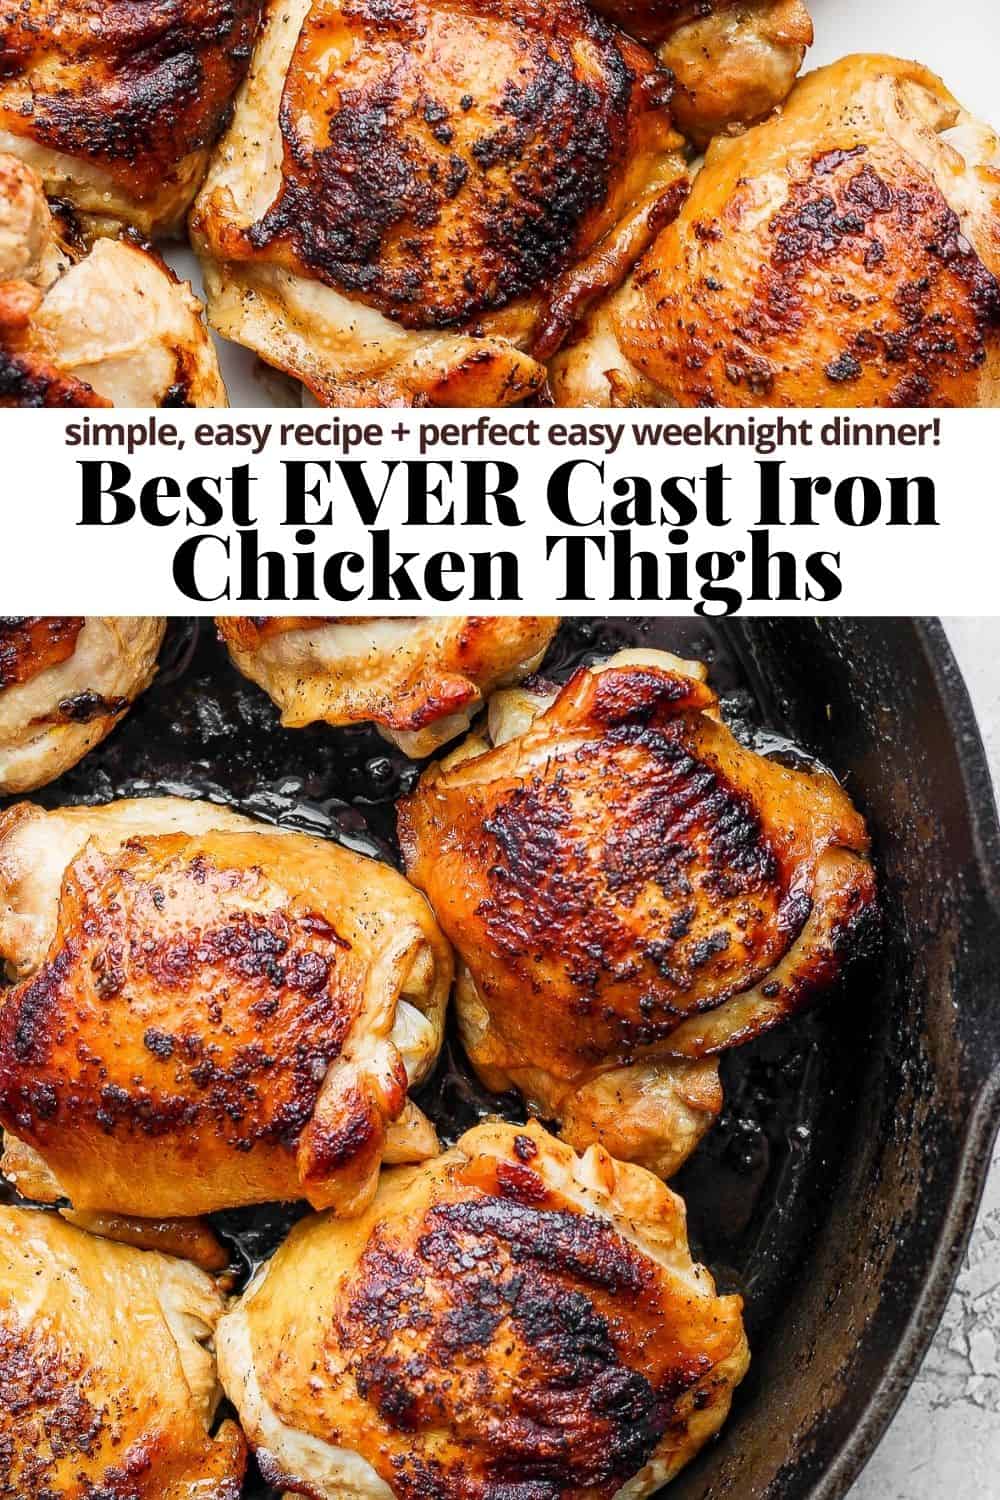 Pinterest image for cast iron chicken thighs.